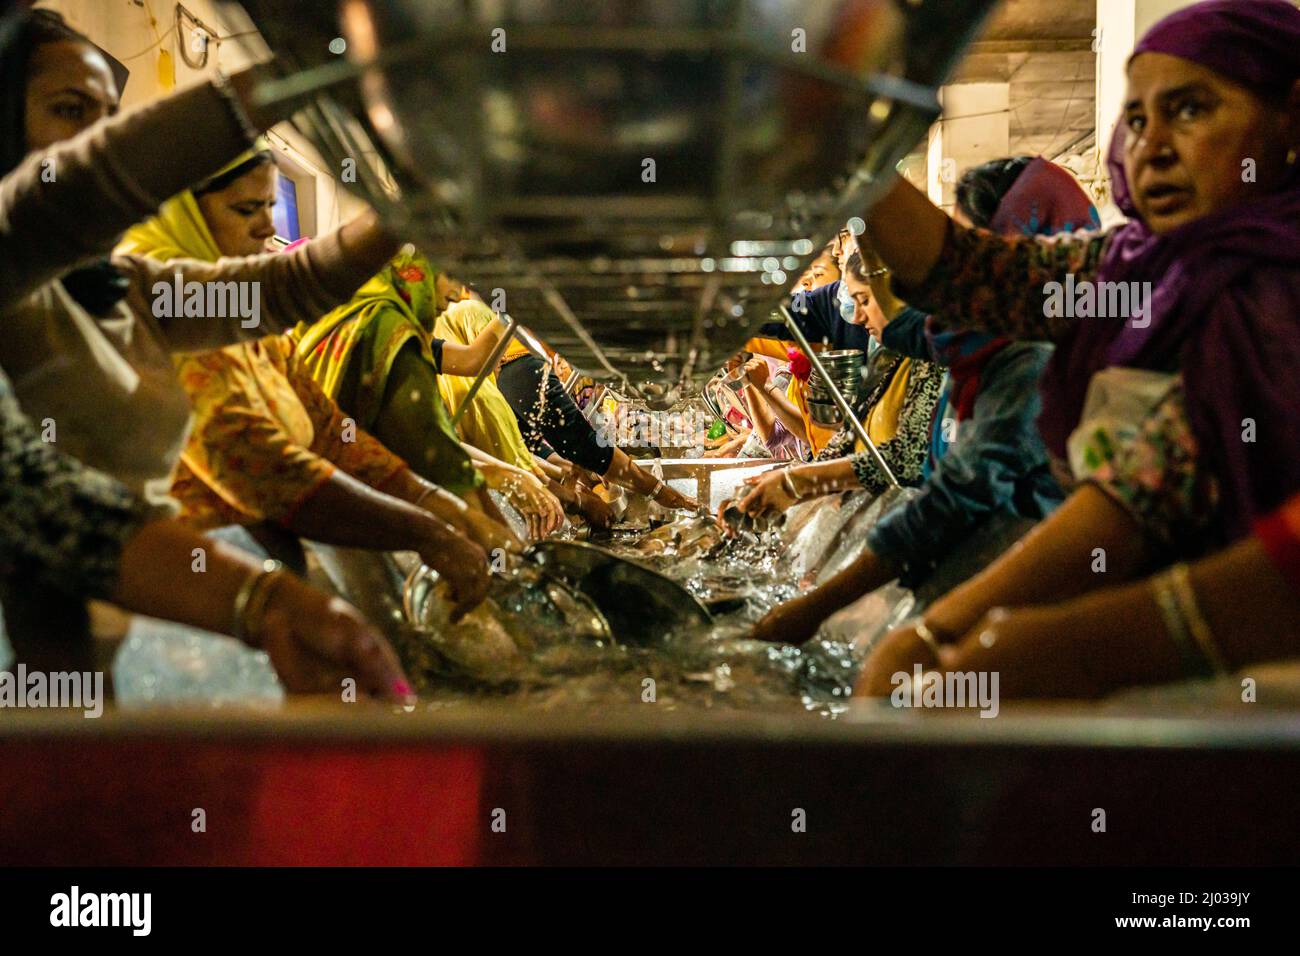 Volunteers handwash all the dishes at the Golden Temple, Amritsar, Punjab, India, Asia Stock Photo